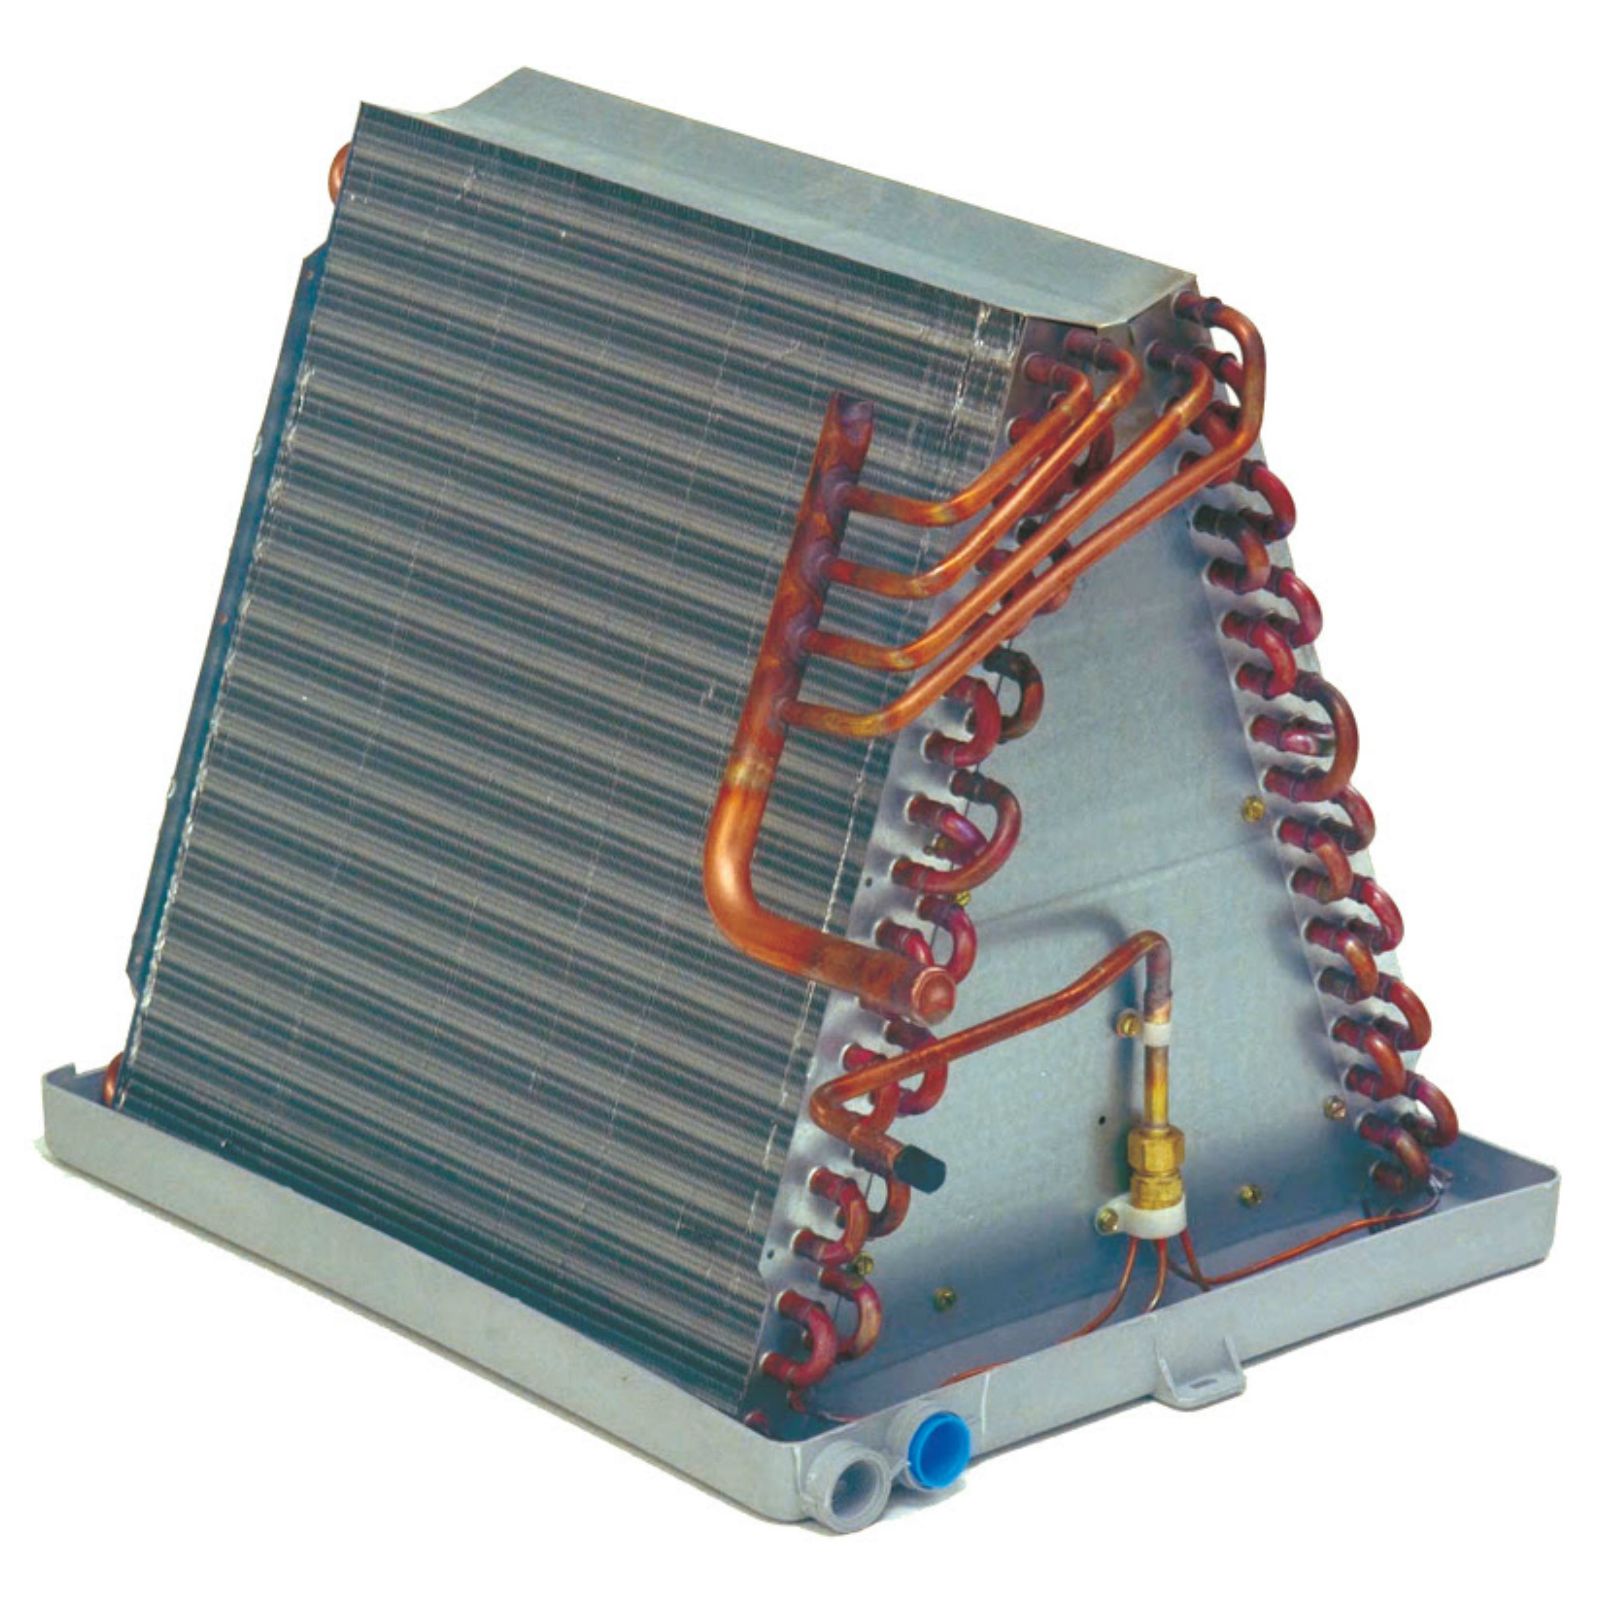 Tempstar EPA42F19WT - 3 1/2 Ton R22 Uncased A Type Piston Replacement Evaporator Coil, 18 1/8" Drain Pan for 15.5" Cabinet